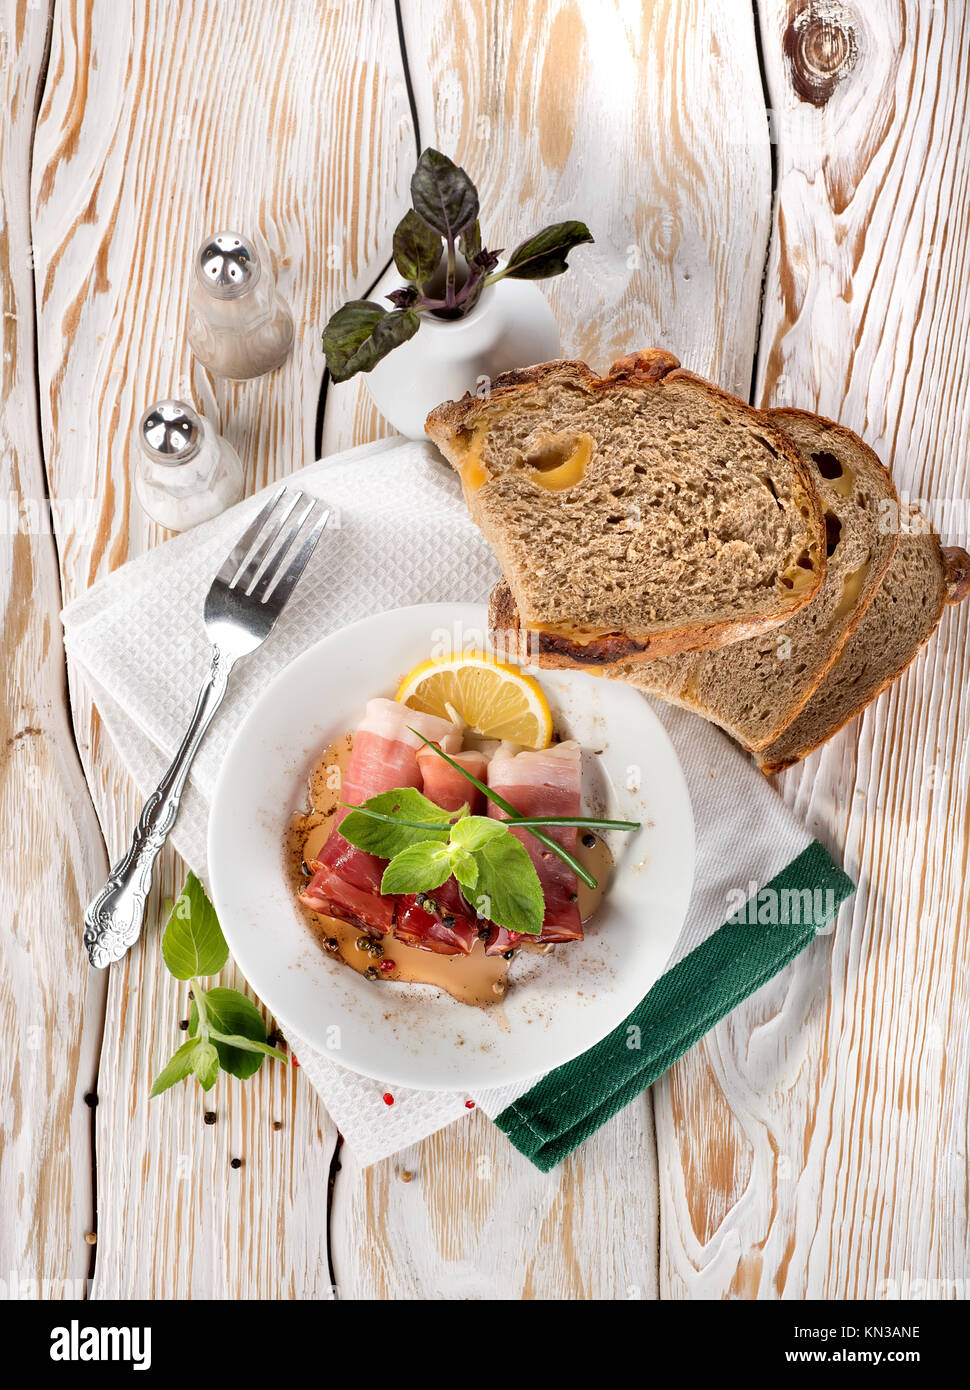 Bacon and bread on a white wooden table. Stock Photo